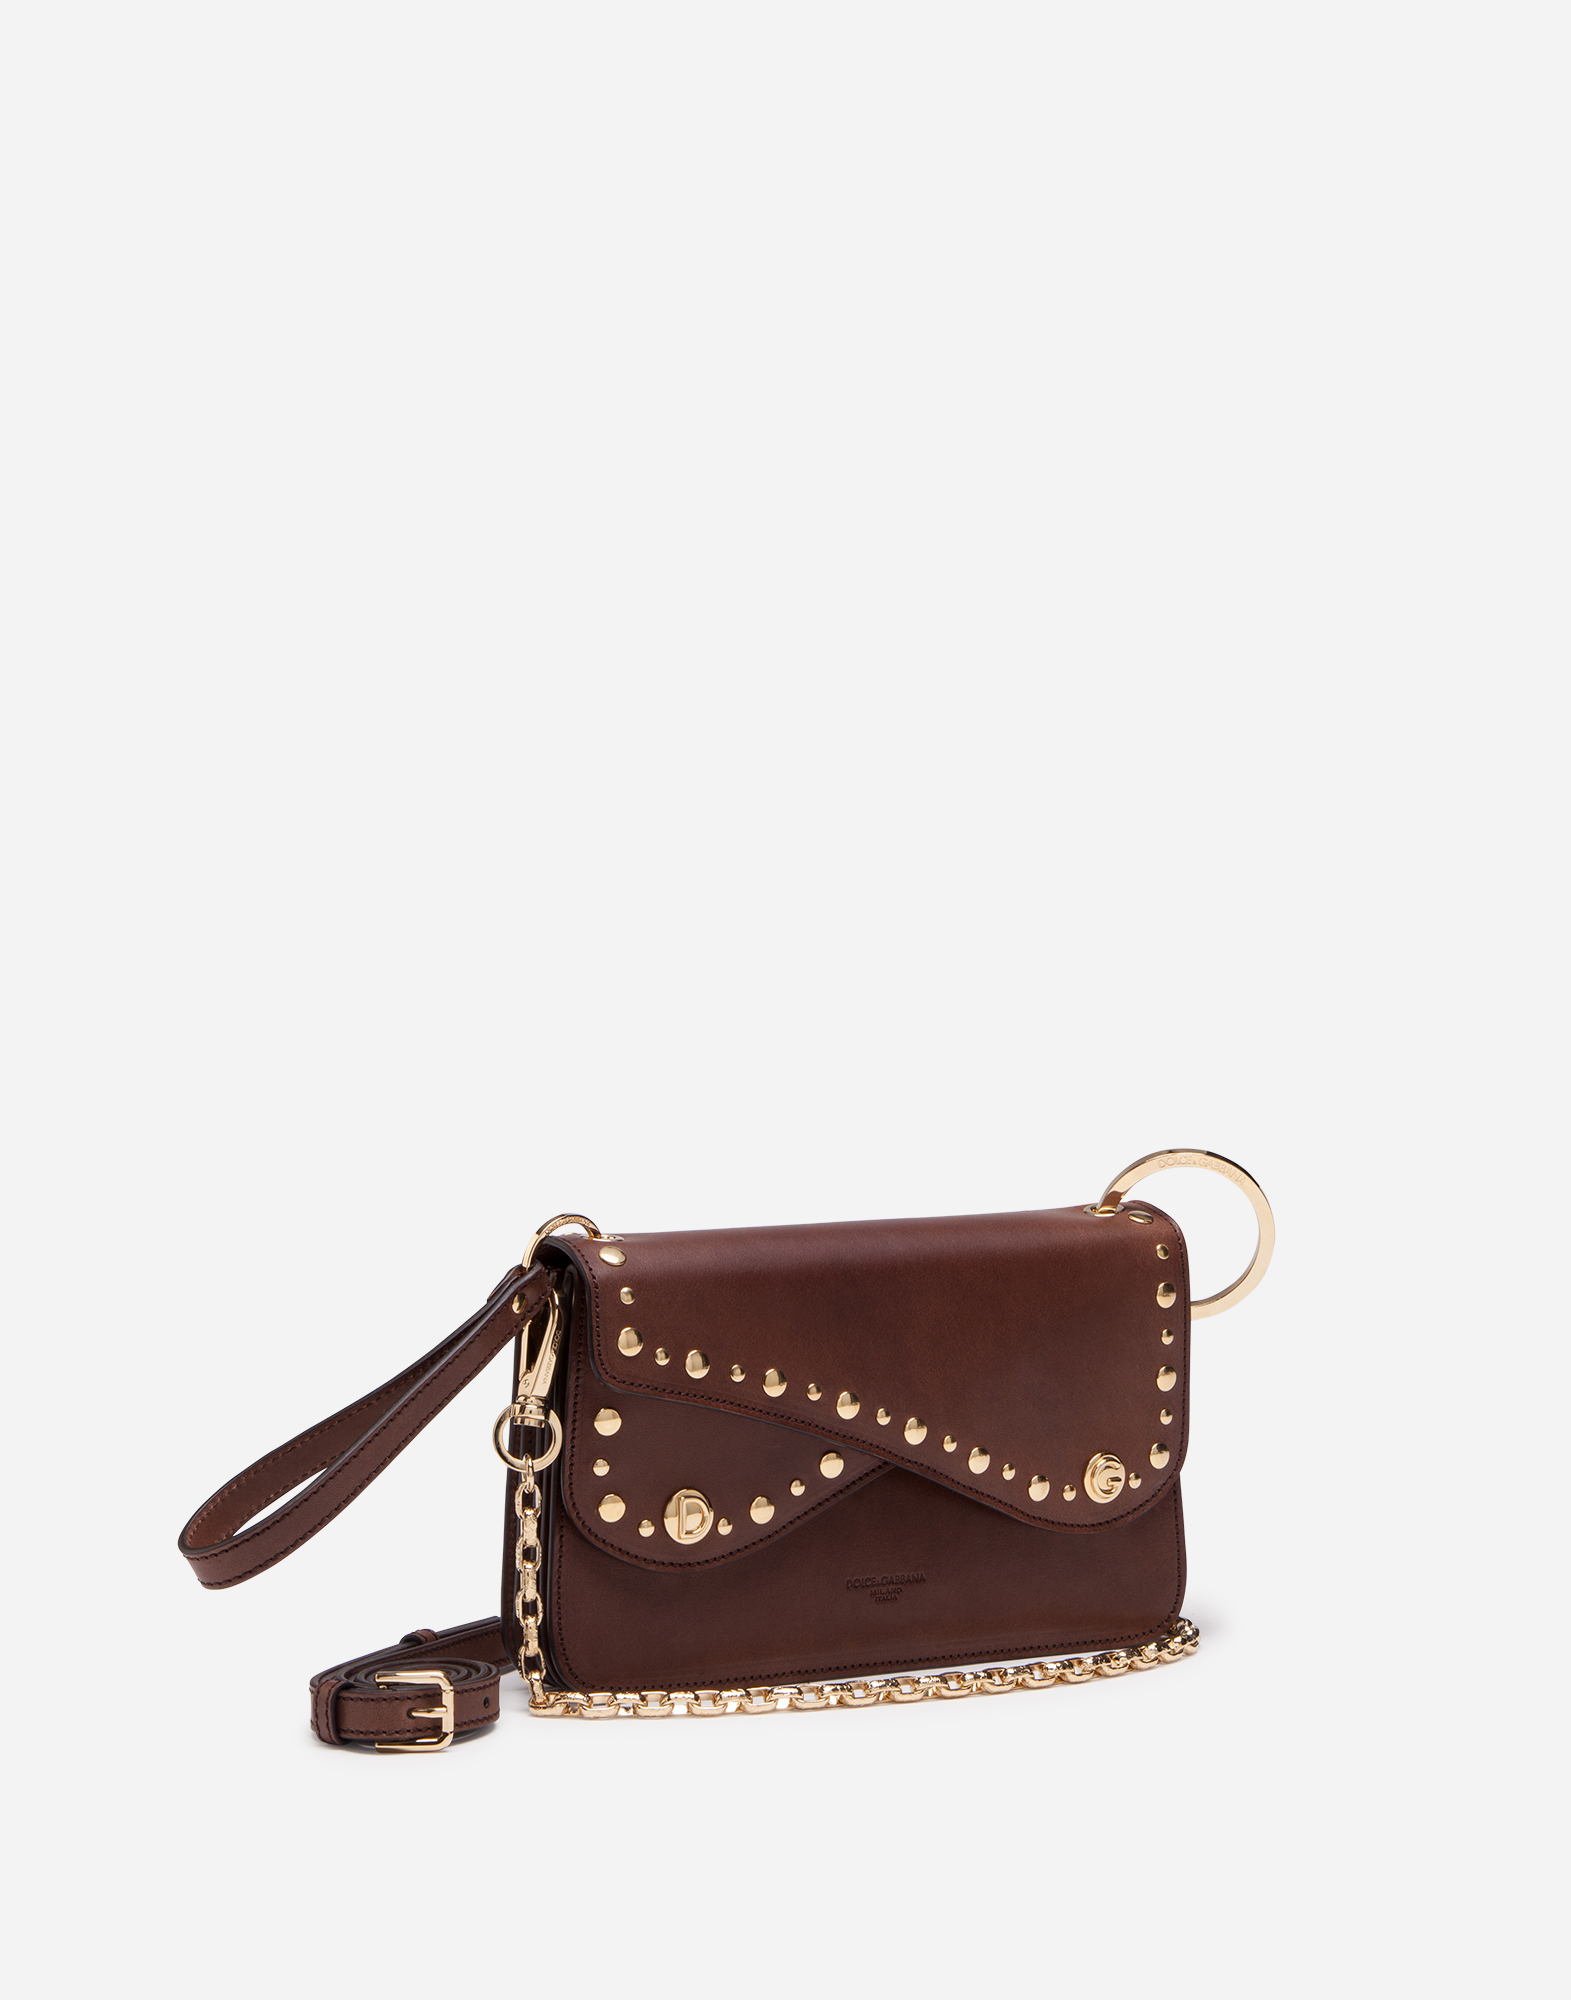 DOLCE & GABBANA BIKER BAG IN COWHIDE WITH EMBROIDERED STUDS